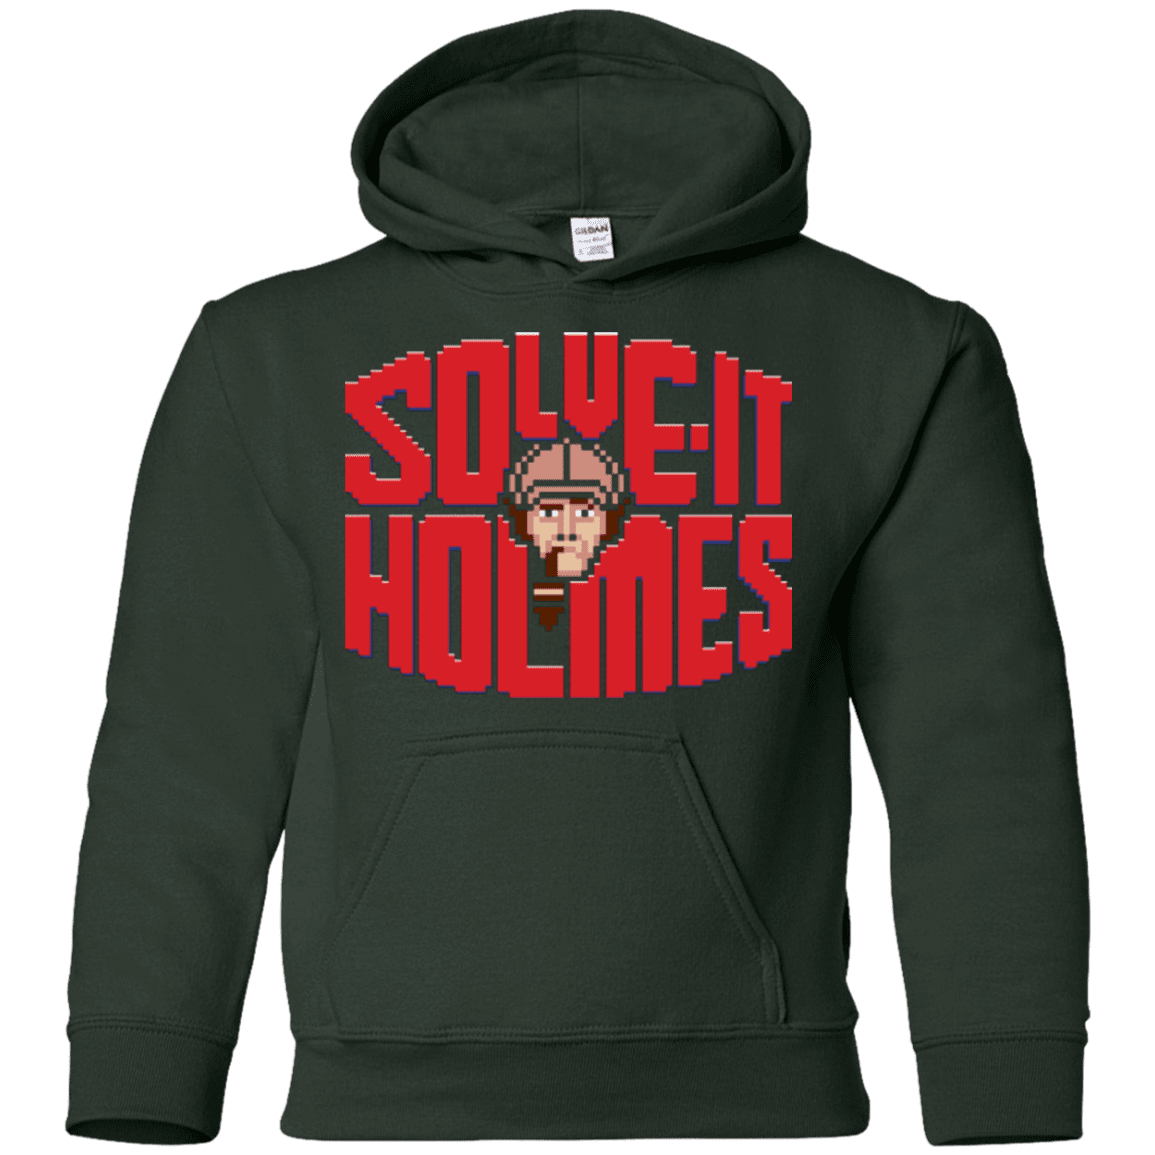 Sweatshirts Forest Green / YS Solve It Holmes Youth Hoodie